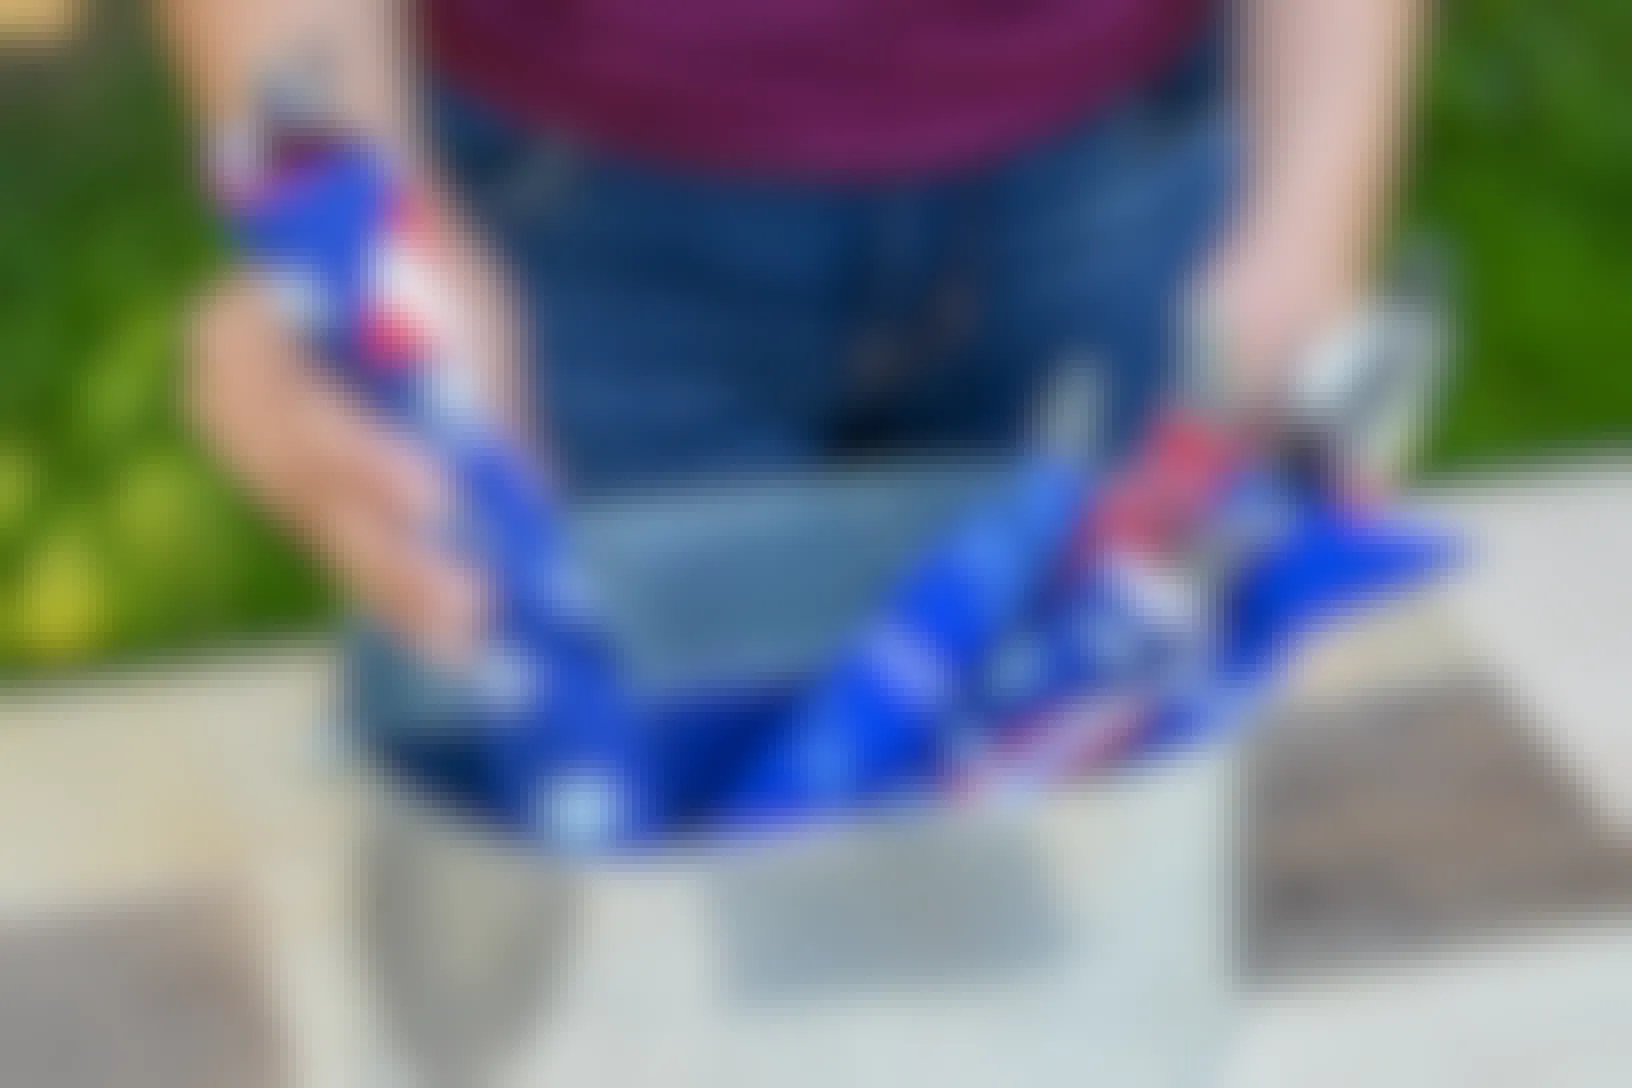 A person putting a set of silverware wrapped in a red, white, and blue bandana into a container with similarly wrapped silverware sets.